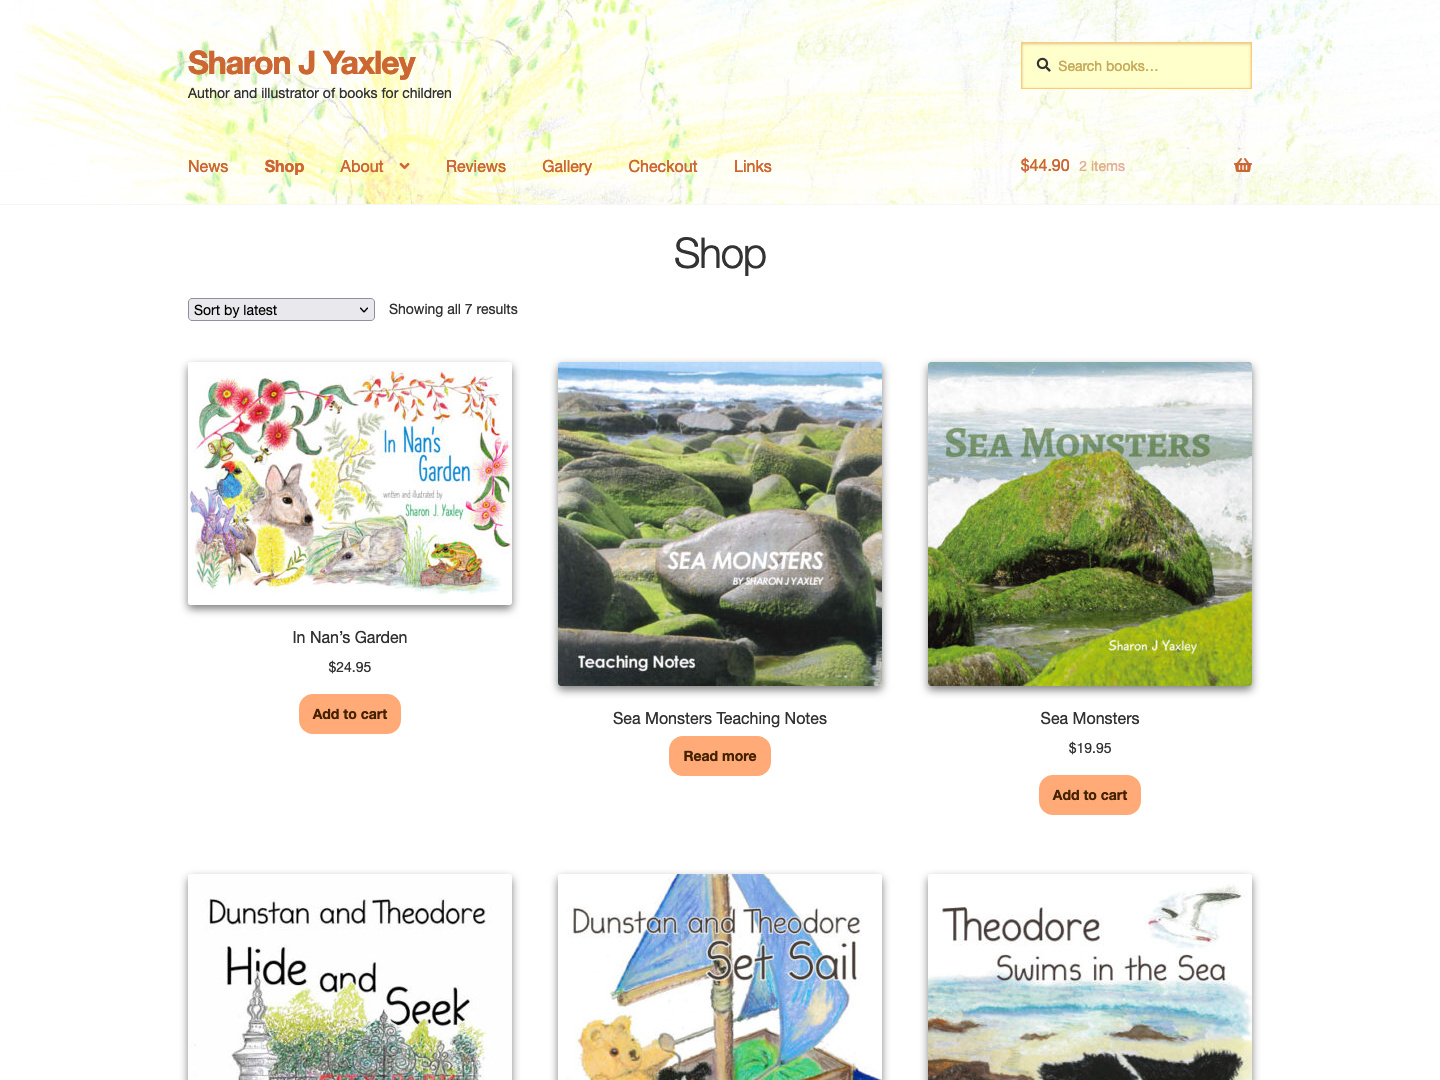 Screen capture of website with the title "Sharon J Yaxley" and heading "Shop". The colours are white and yellow. The shop contains book cover pages.